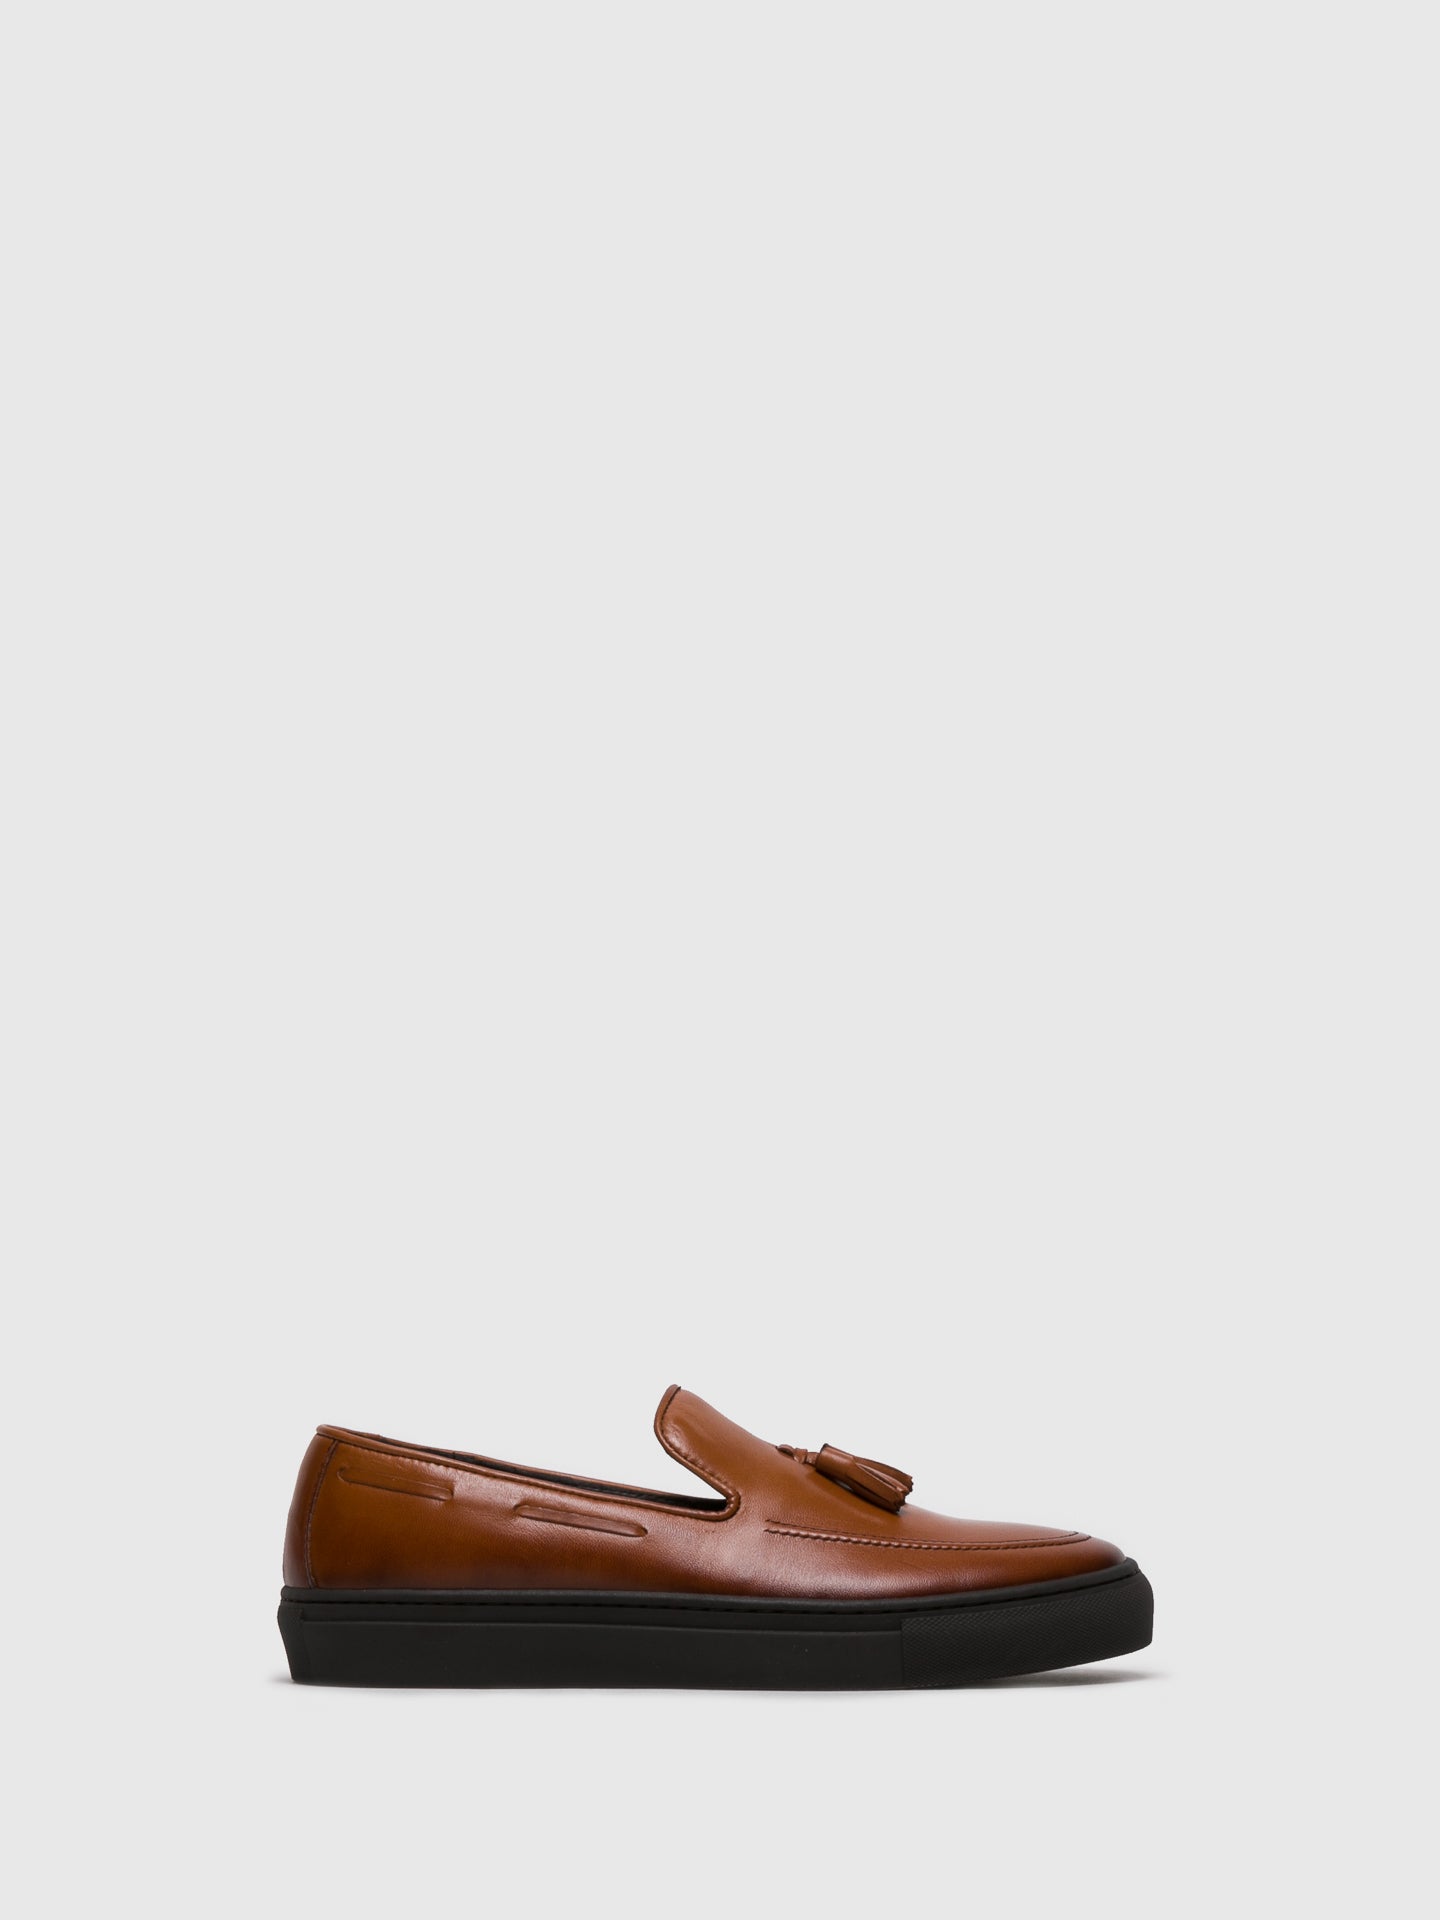 Foreva Brown Loafers Shoes